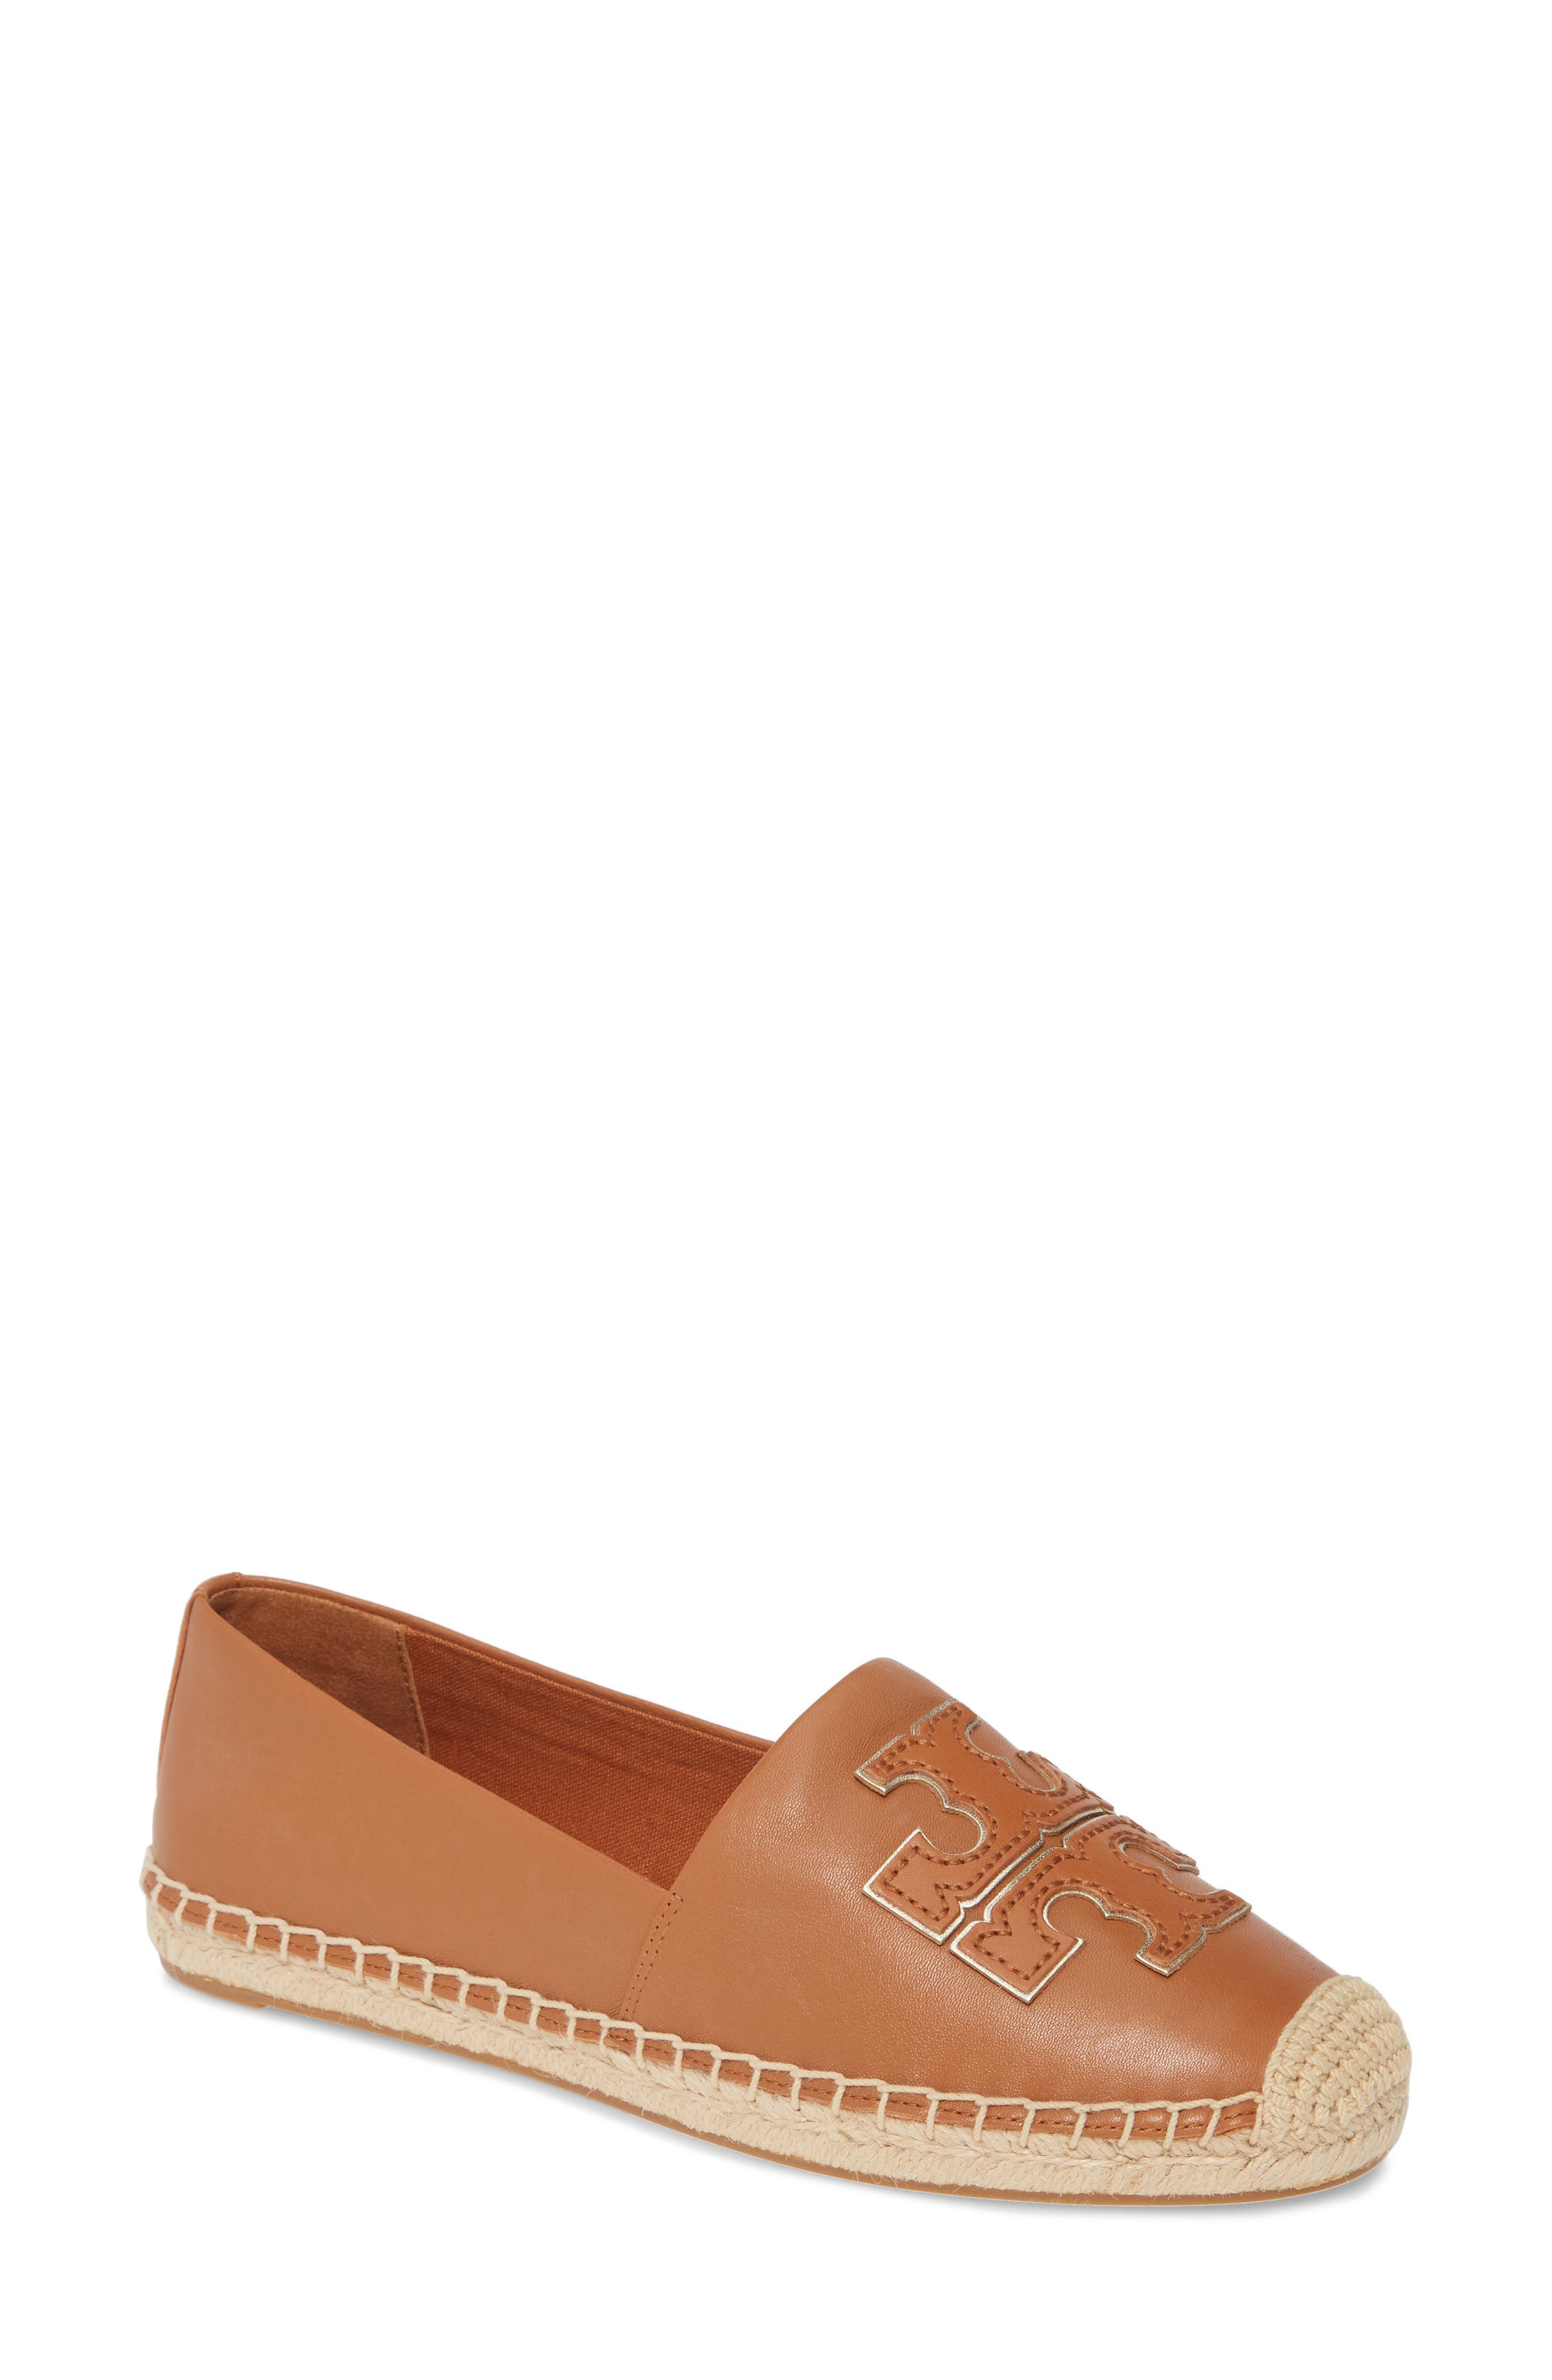 toryburch shoes | Nordstrom